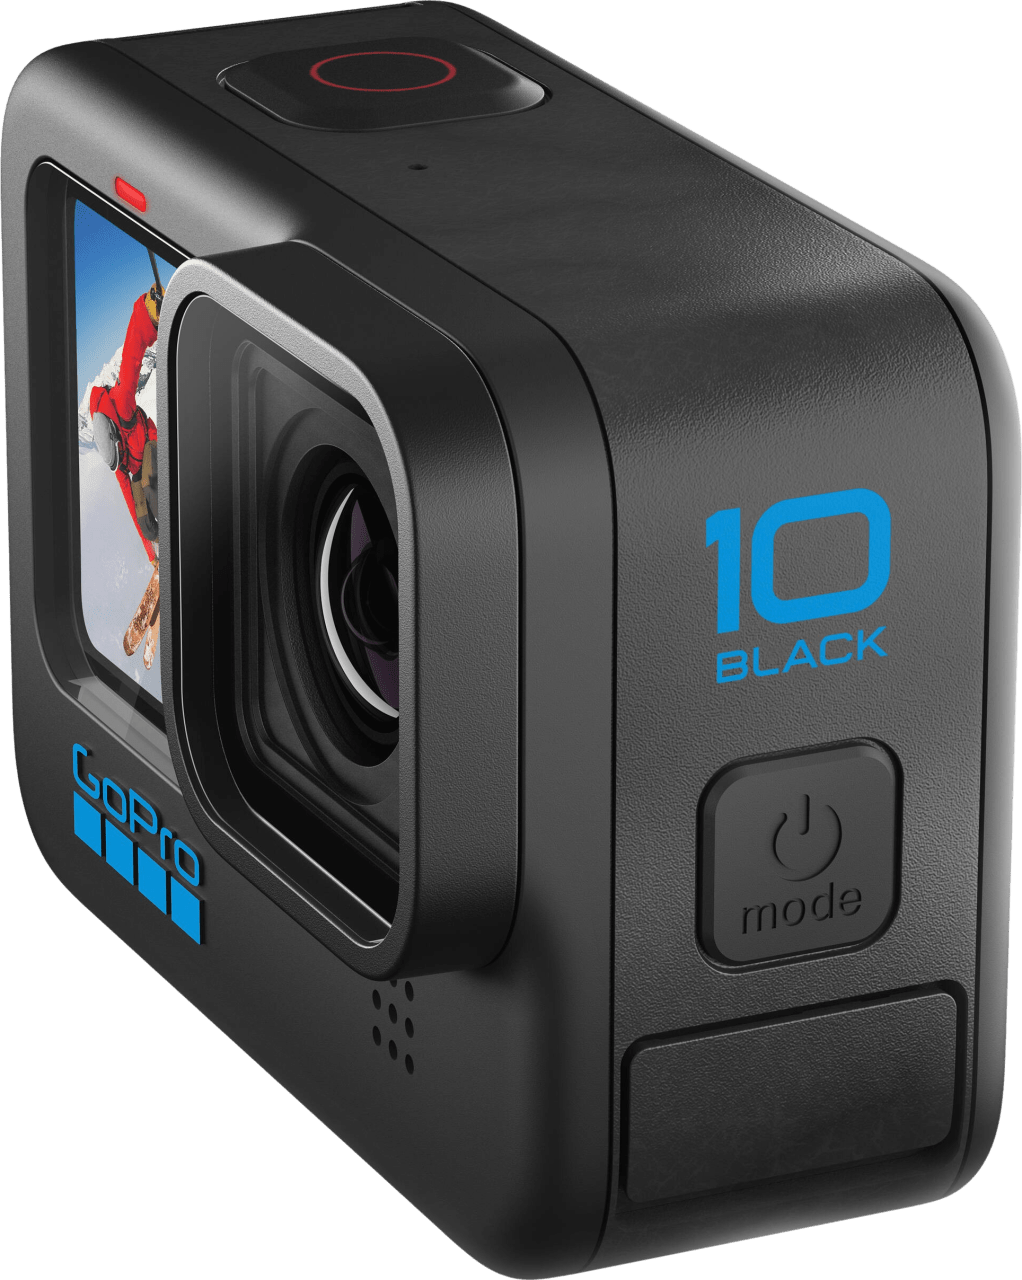 Rent GoPro Hero 10 Black from €24.90 per month